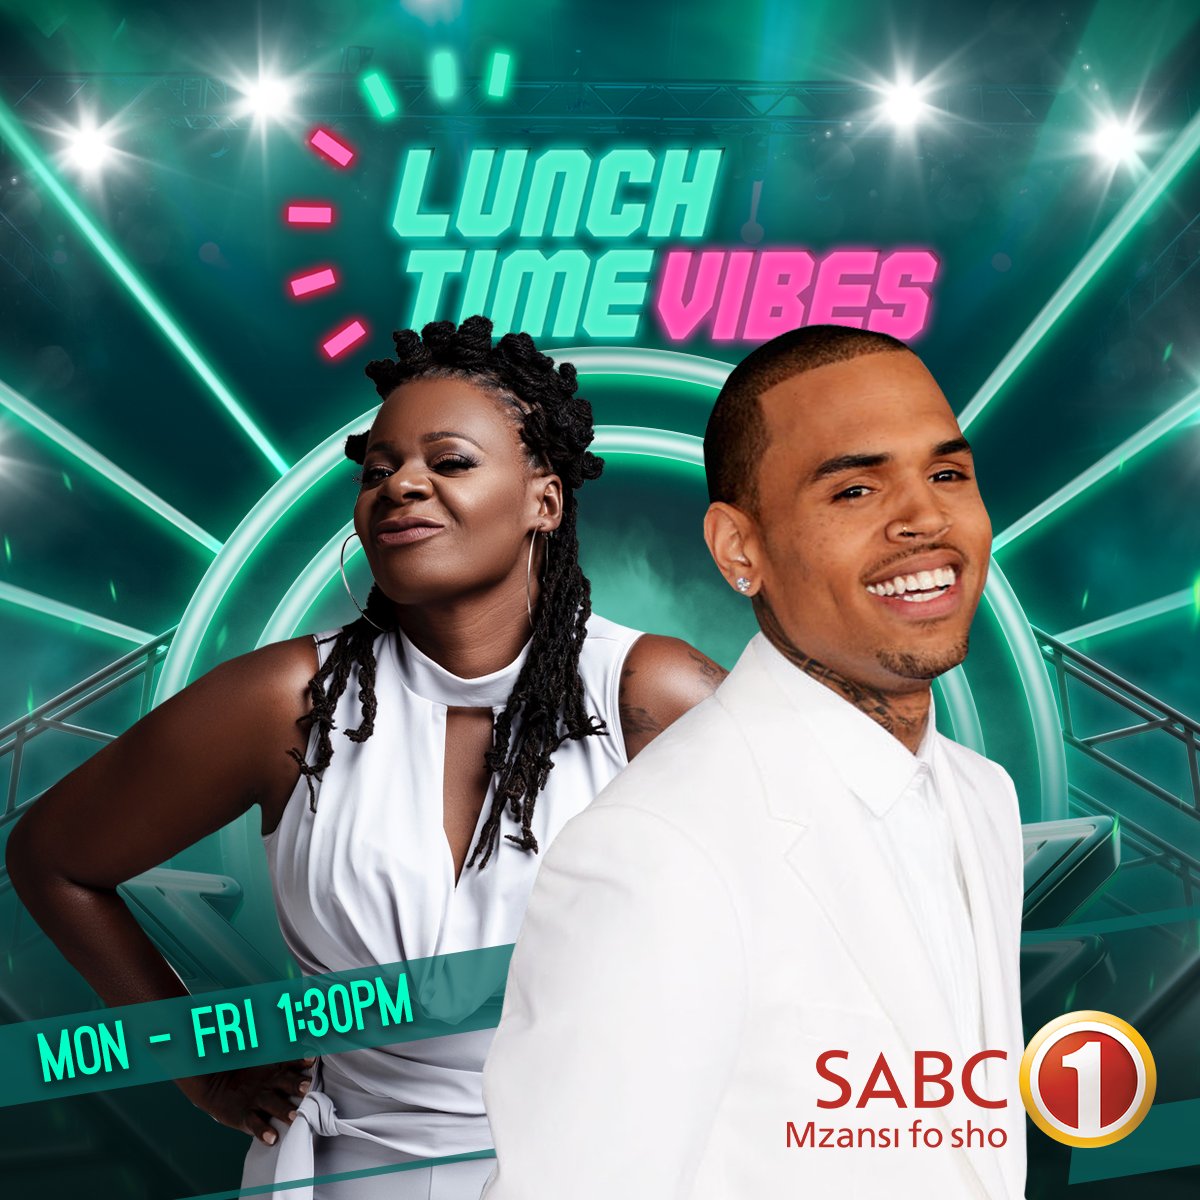 Let the music take centre stage during your lunch break! Tune into Lunchtime Vibes and recharge your spirit every weekday at 1:30 PM only on @Official_SABC1 - Mzansi Fo Sho. #SABC1SiOn #LunchtimeVibes